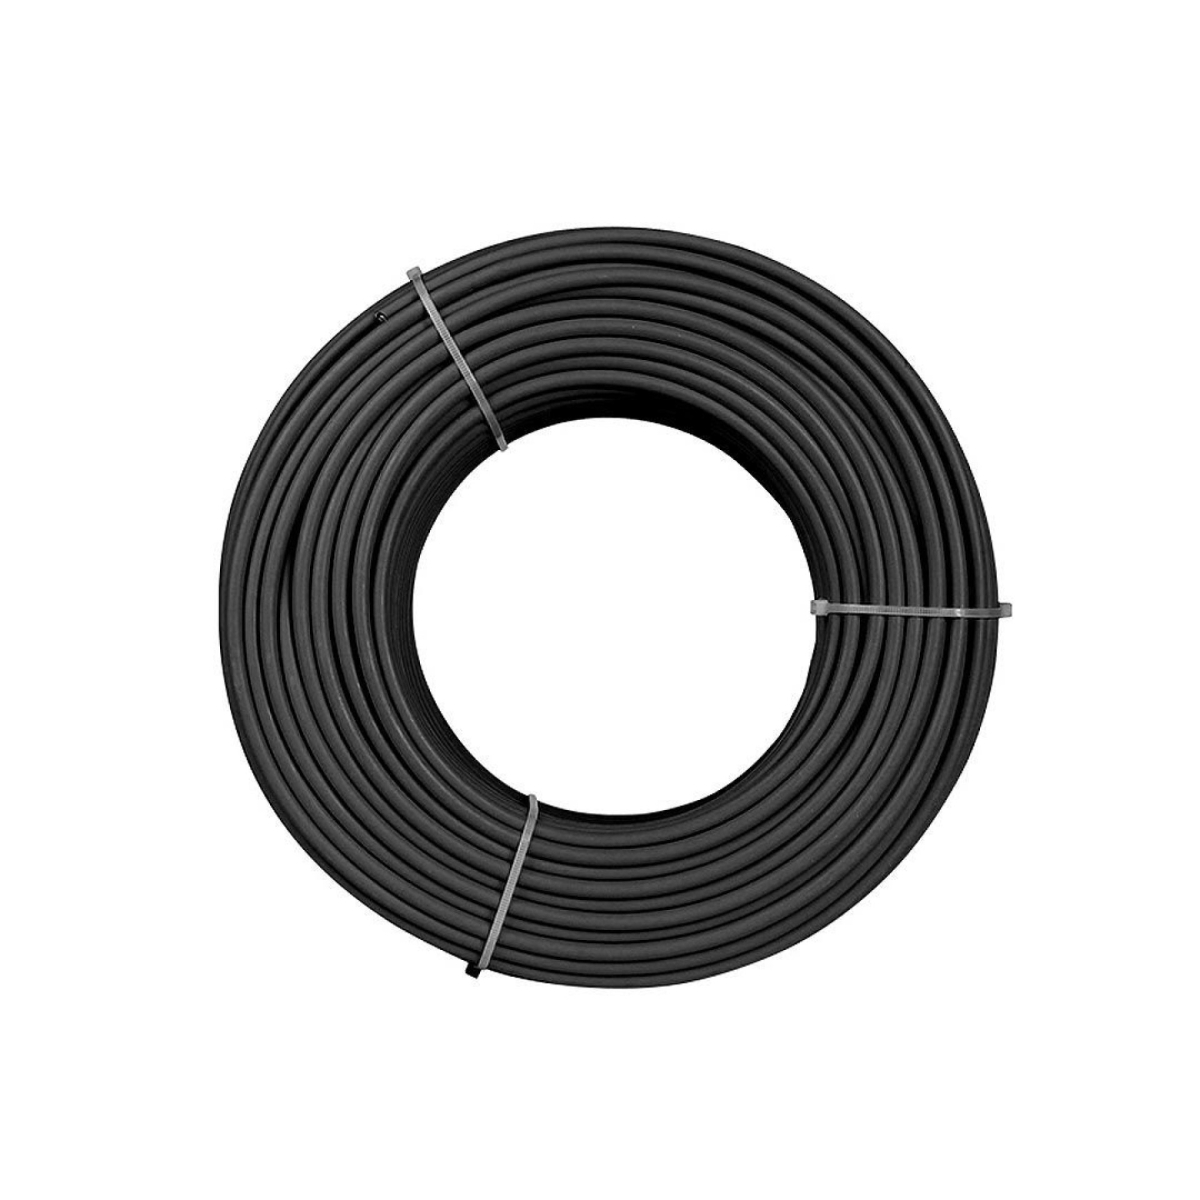 TommaTech 2.5mm² Solar Cable Black 1 Meter